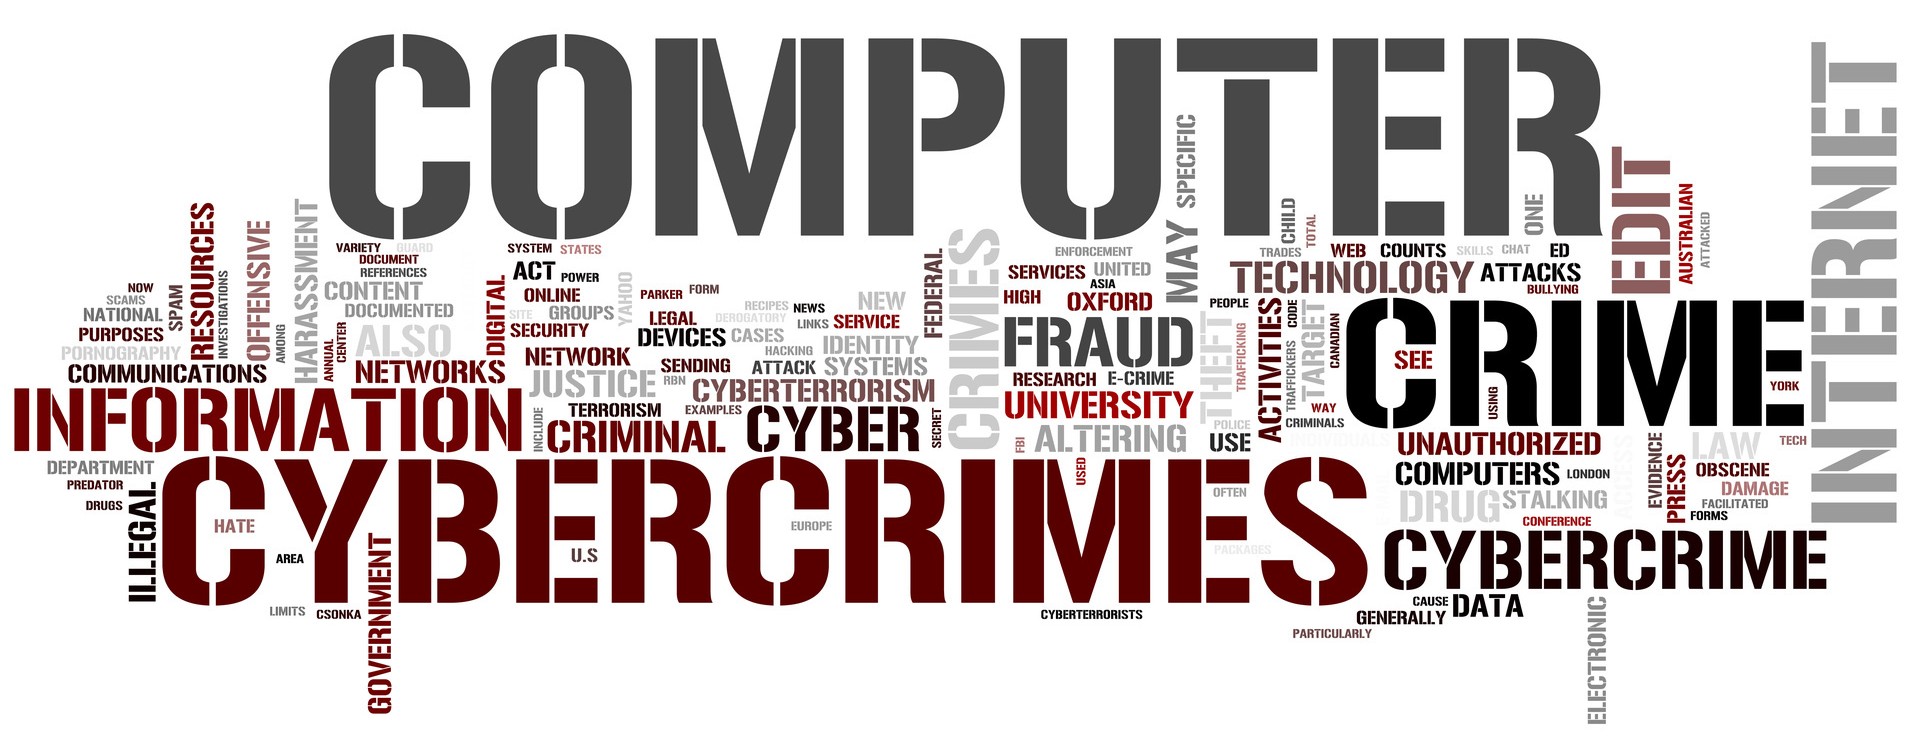 Cybercrime in Malaysia and US